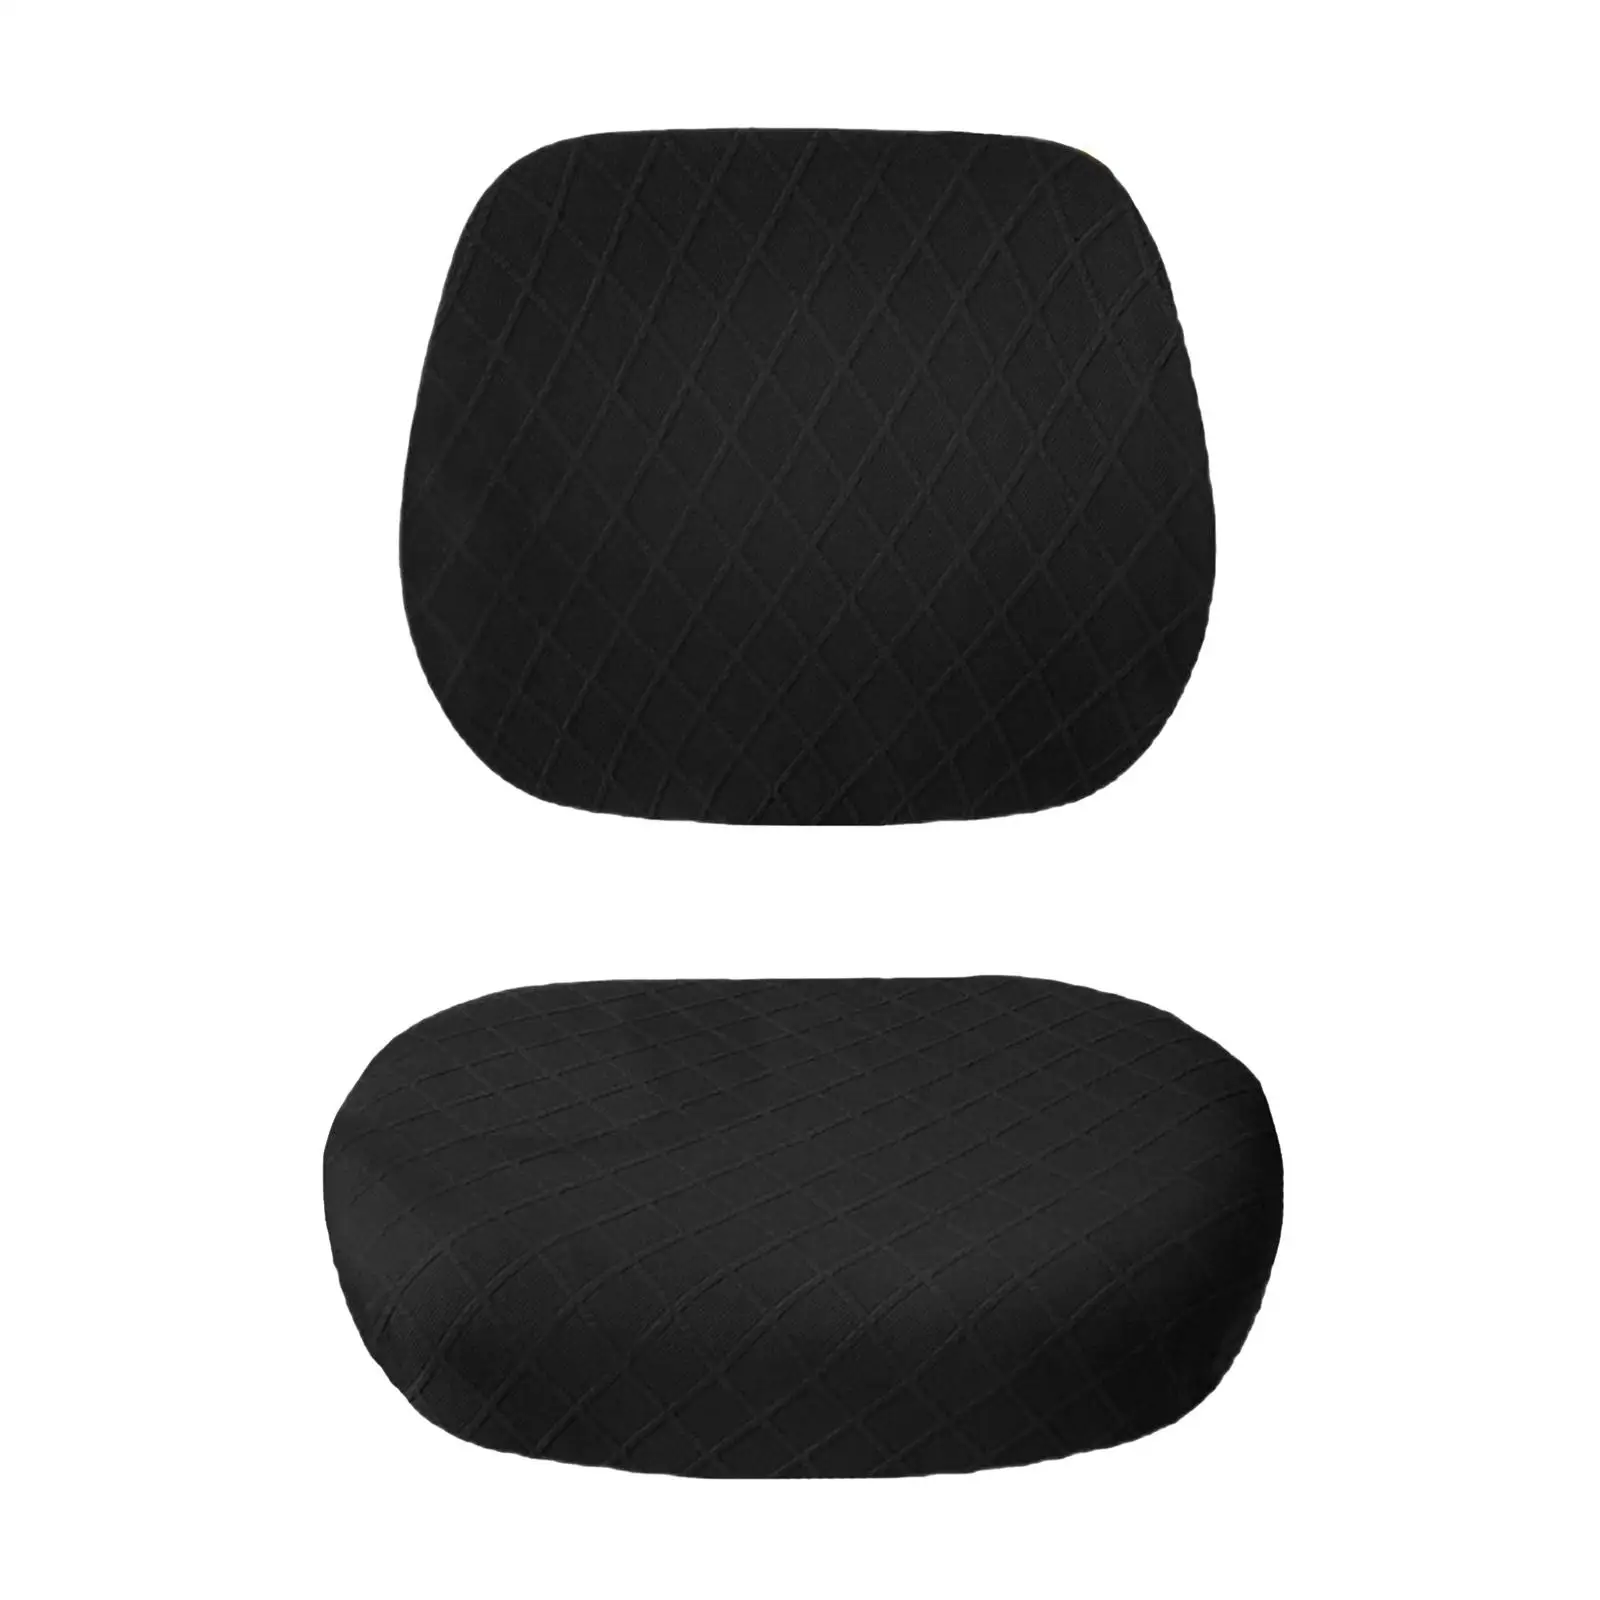 Split Rotating Seat Cover Slipcover Stretch Polyester Dustproof Computer Cover for Rotating Swivel Computer 